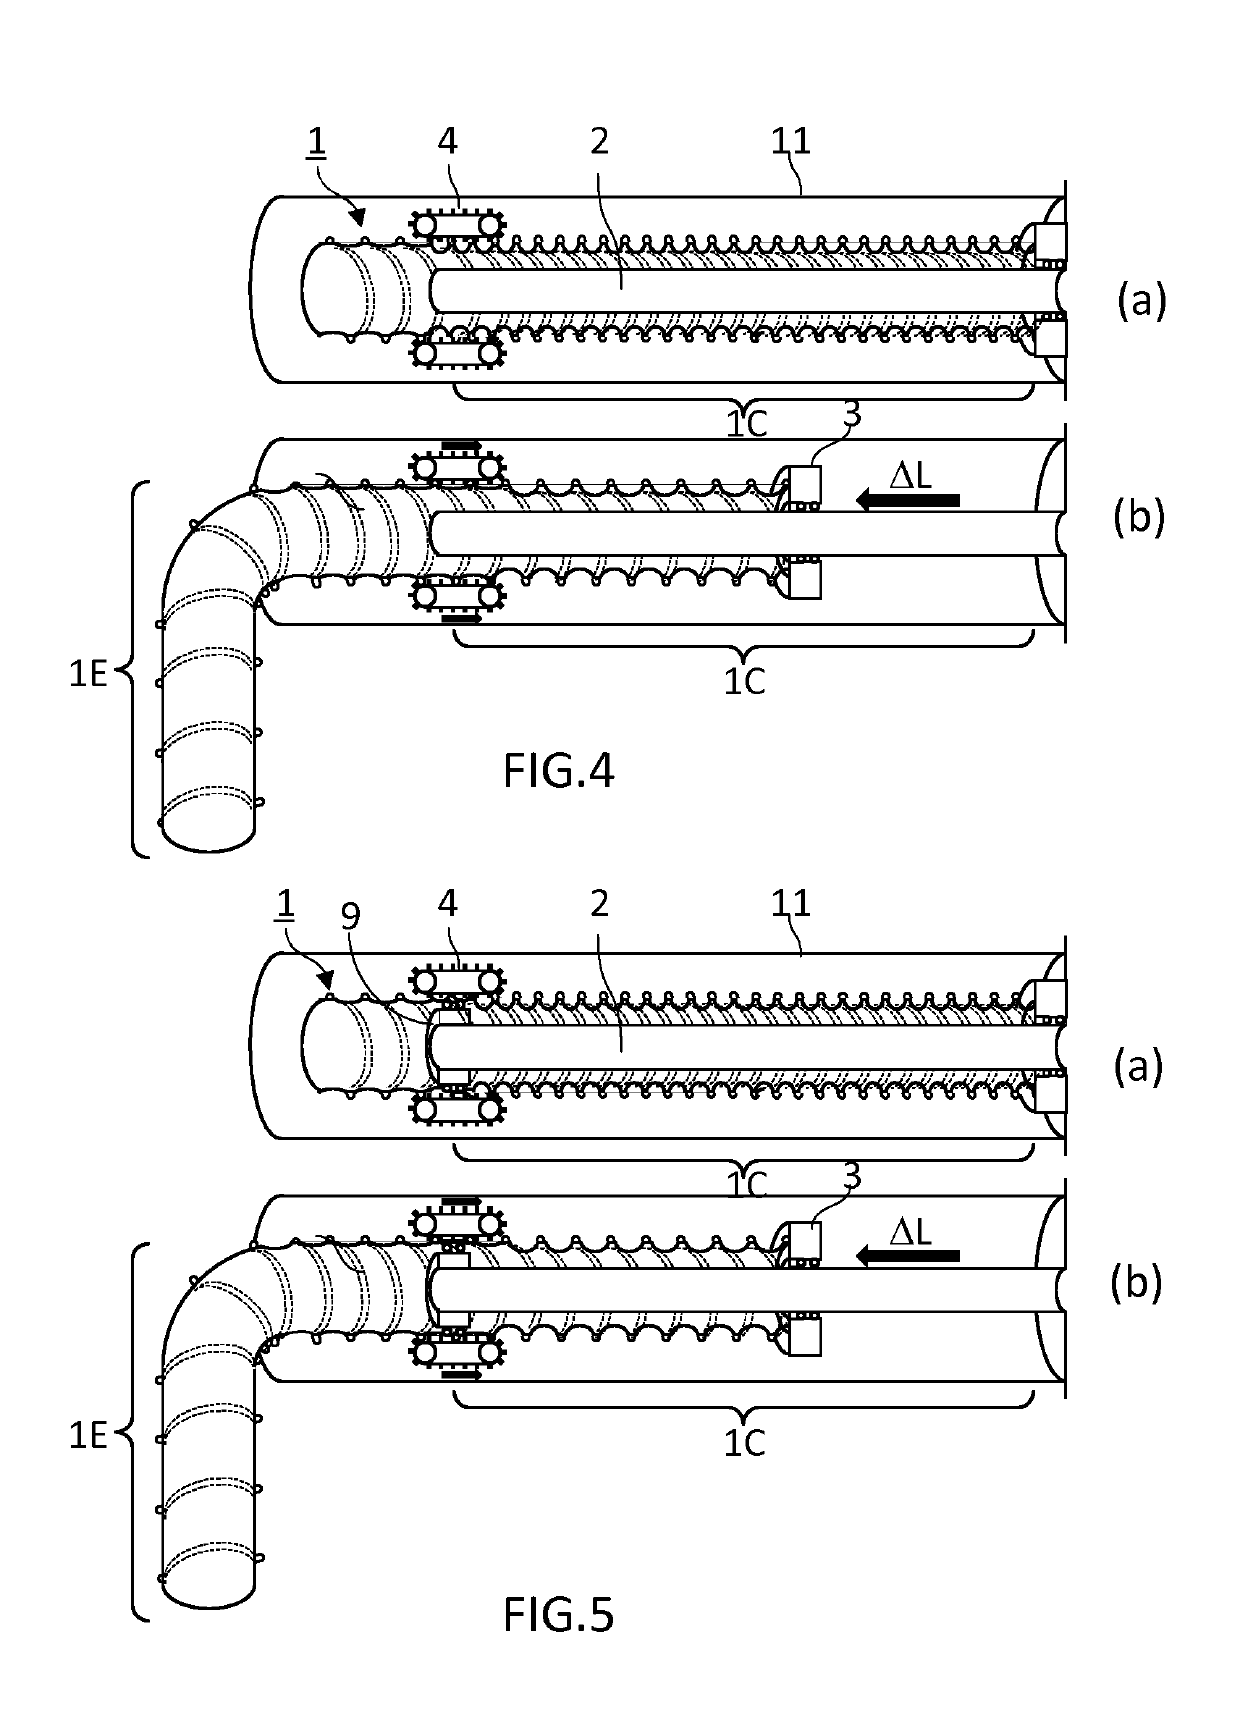 Device comprising a drive system for extending and retracting a conditioned air hose